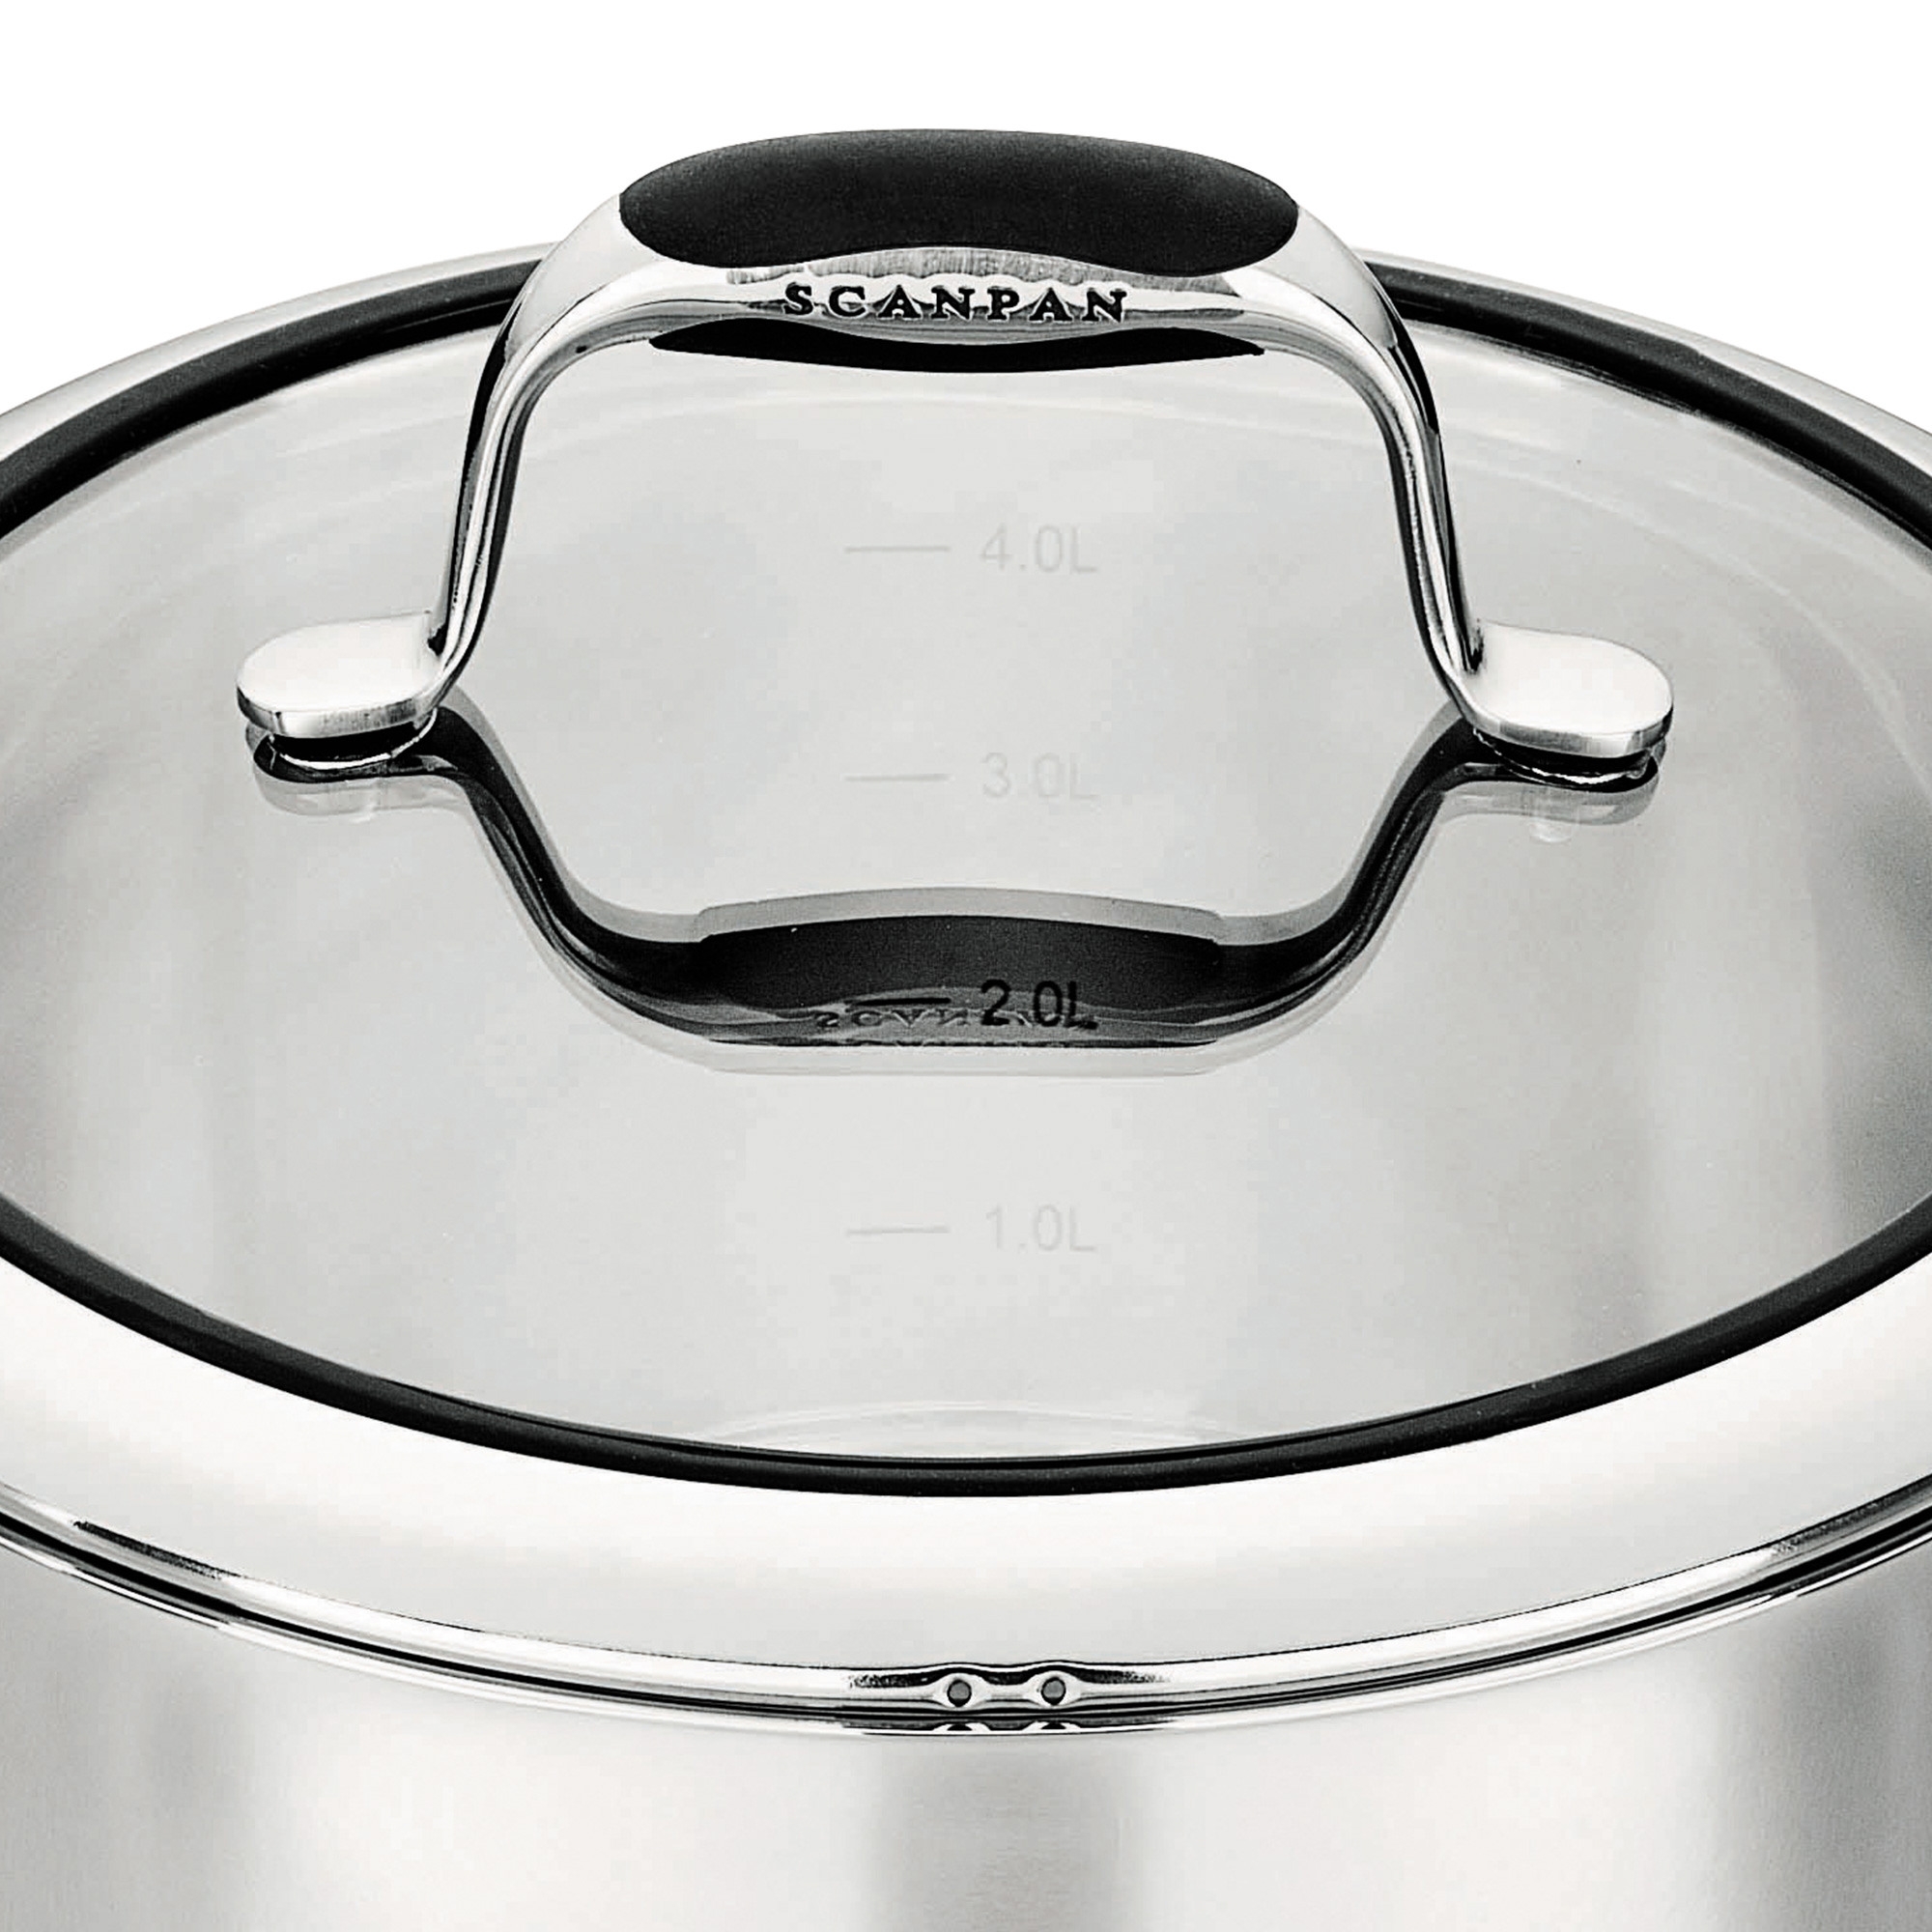 Scanpan Coppernox Covered Dutch Oven 4.8L Image 2